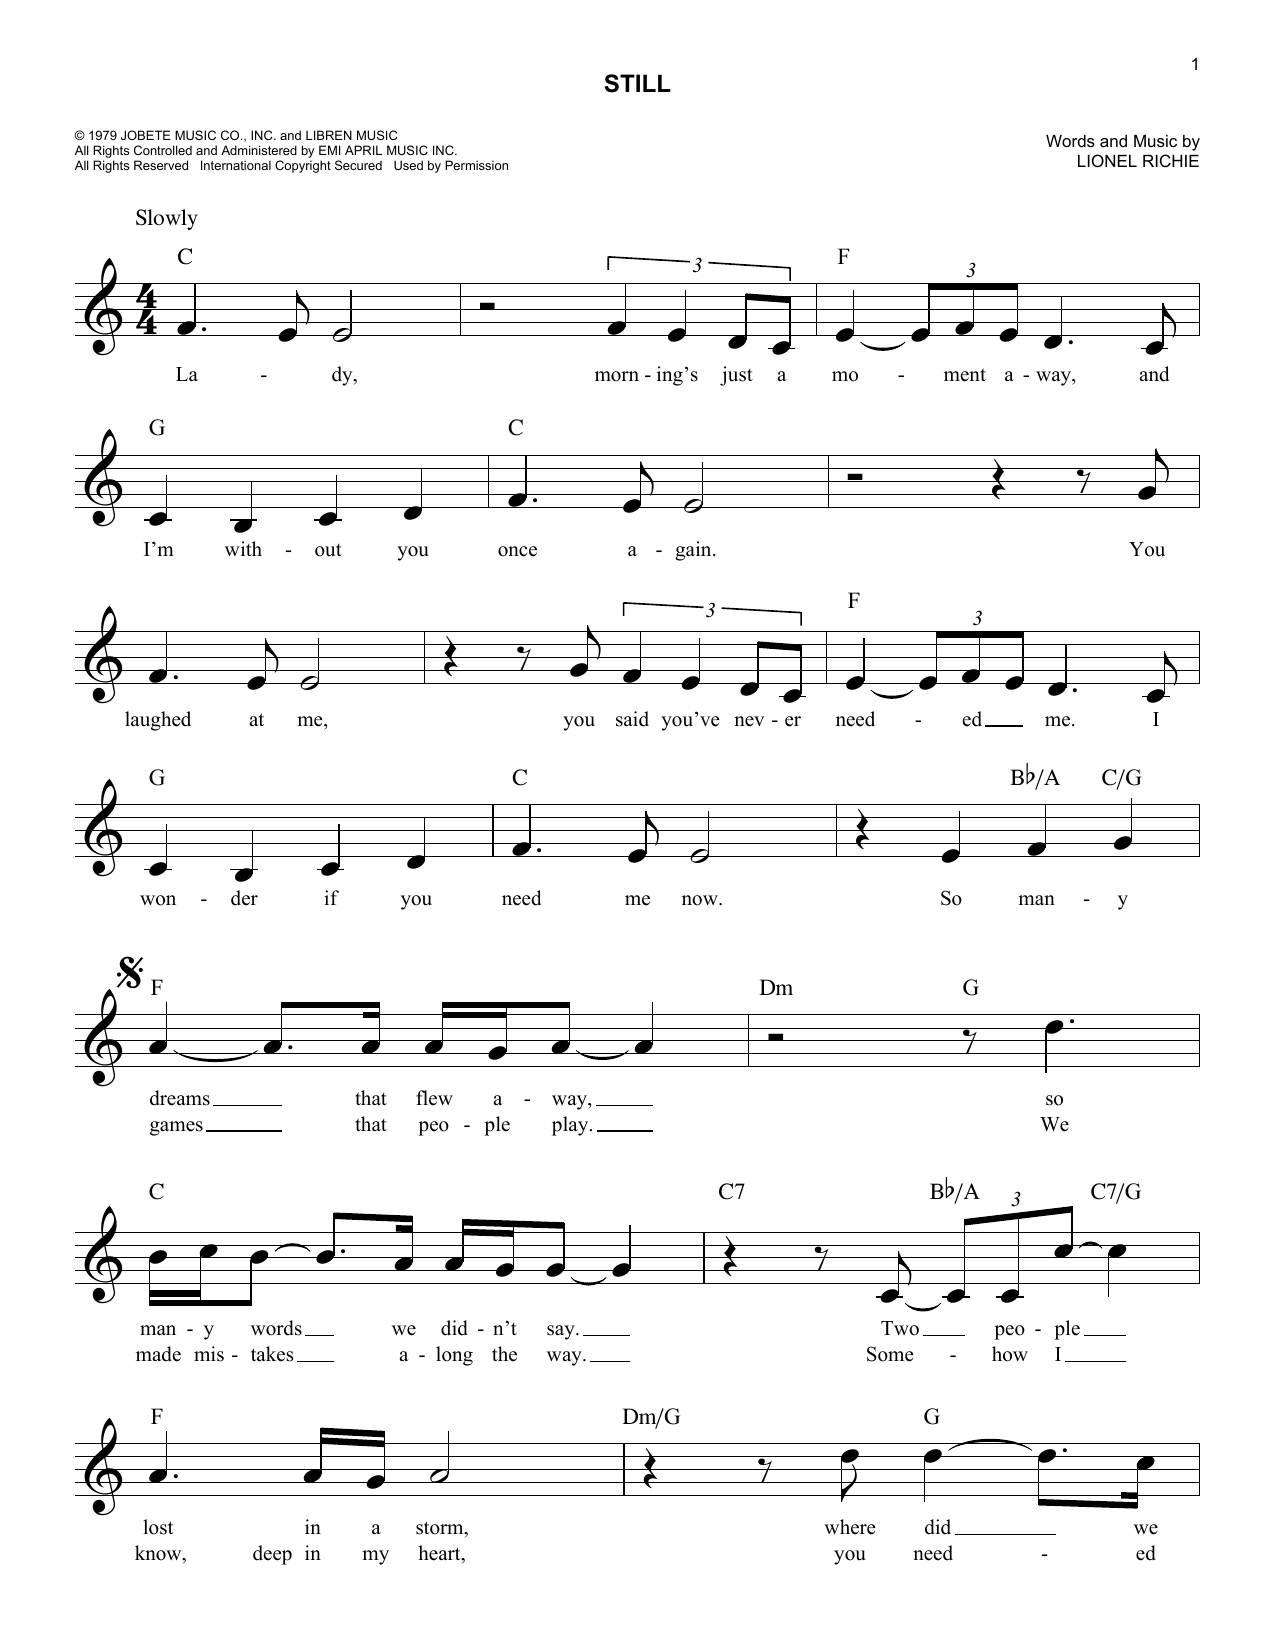 Download The Commodores Still Sheet Music